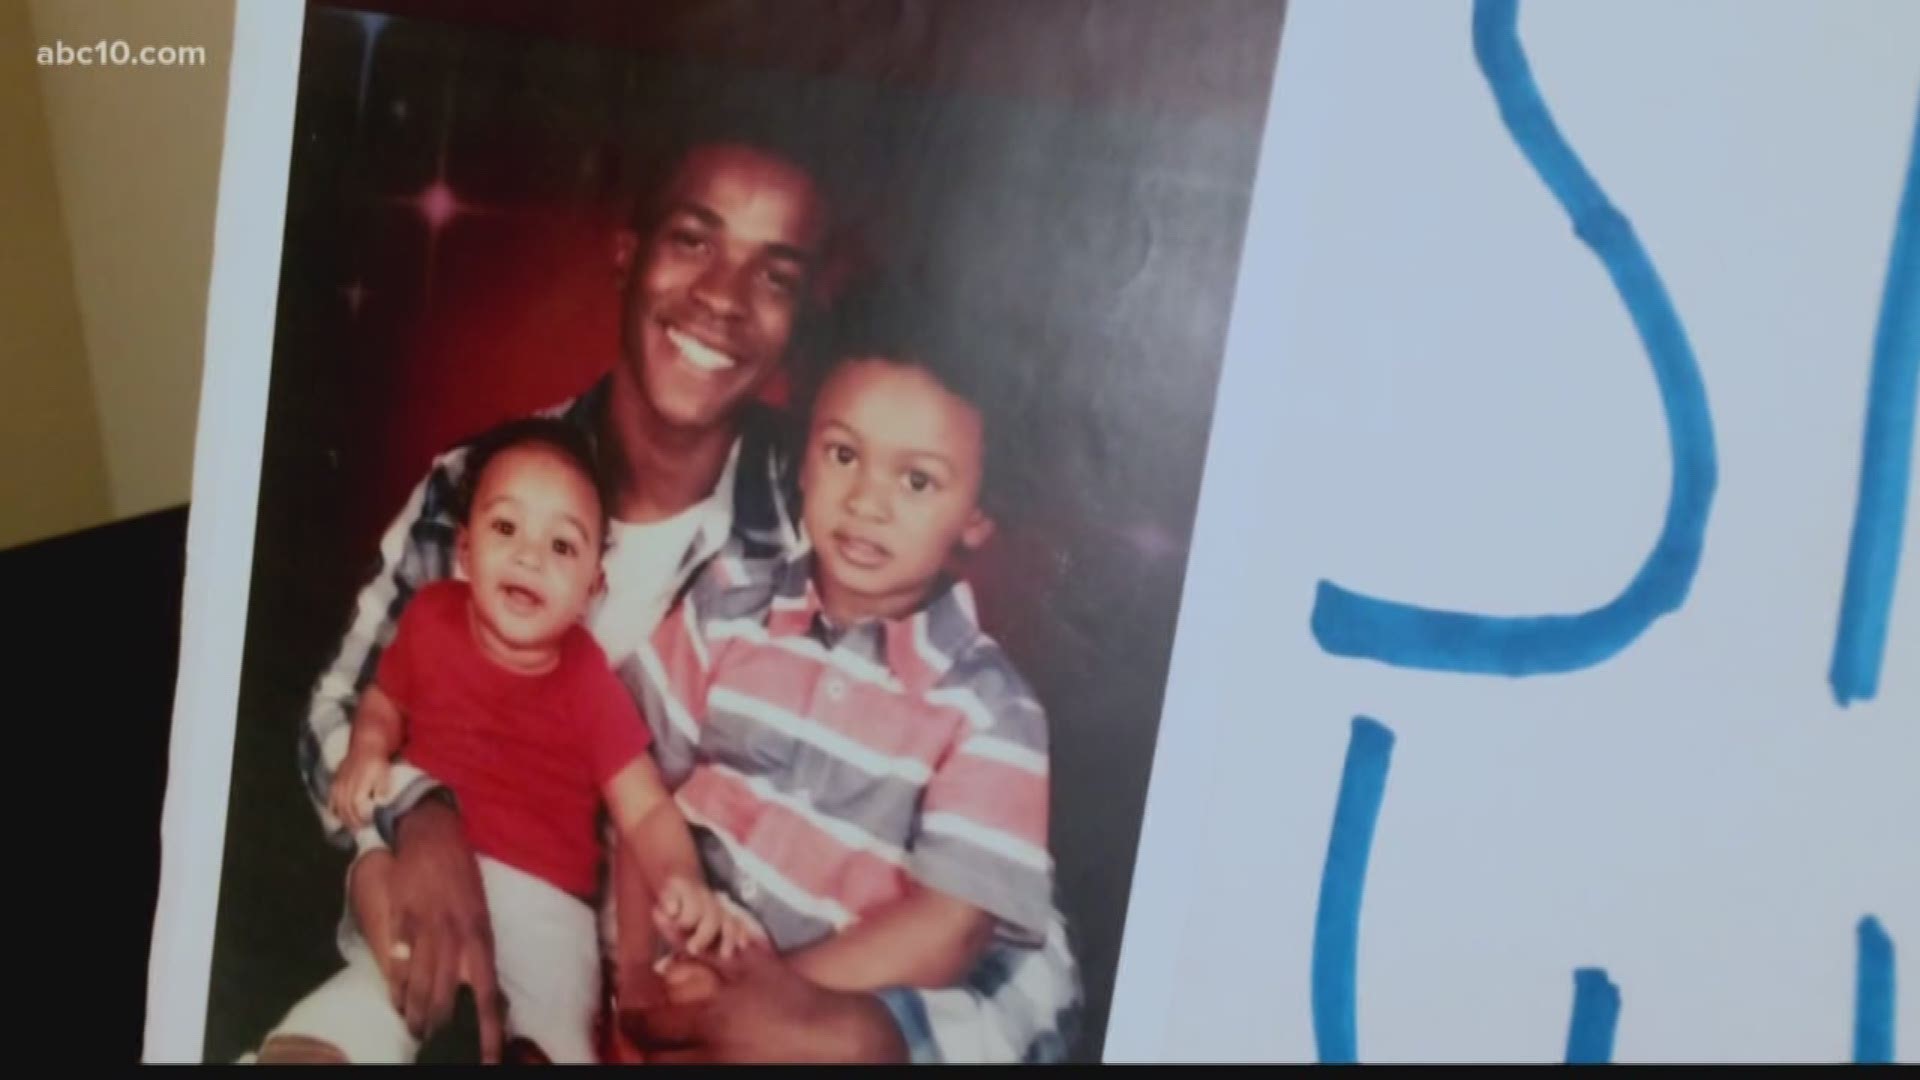 A devastated grandmother describing the moments her grandson Stephon Clark, 22, was shot and killed by police in the family's South Sacramento backyard.